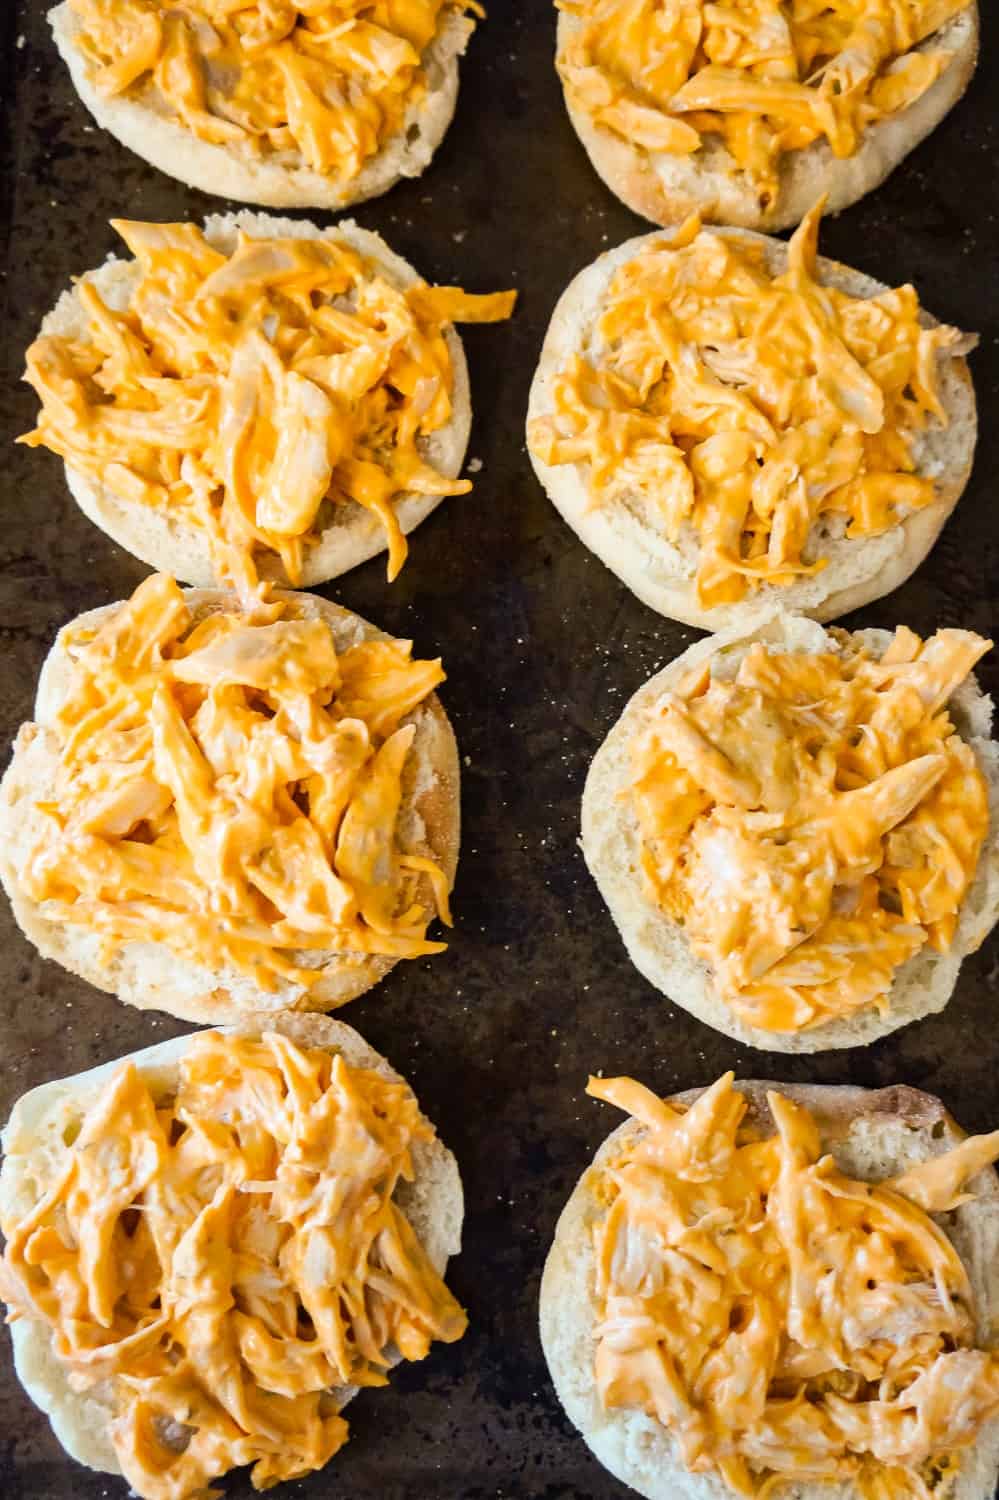 shredded chicken coated in Buffalo sauce on top of English muffins on a baking sheet